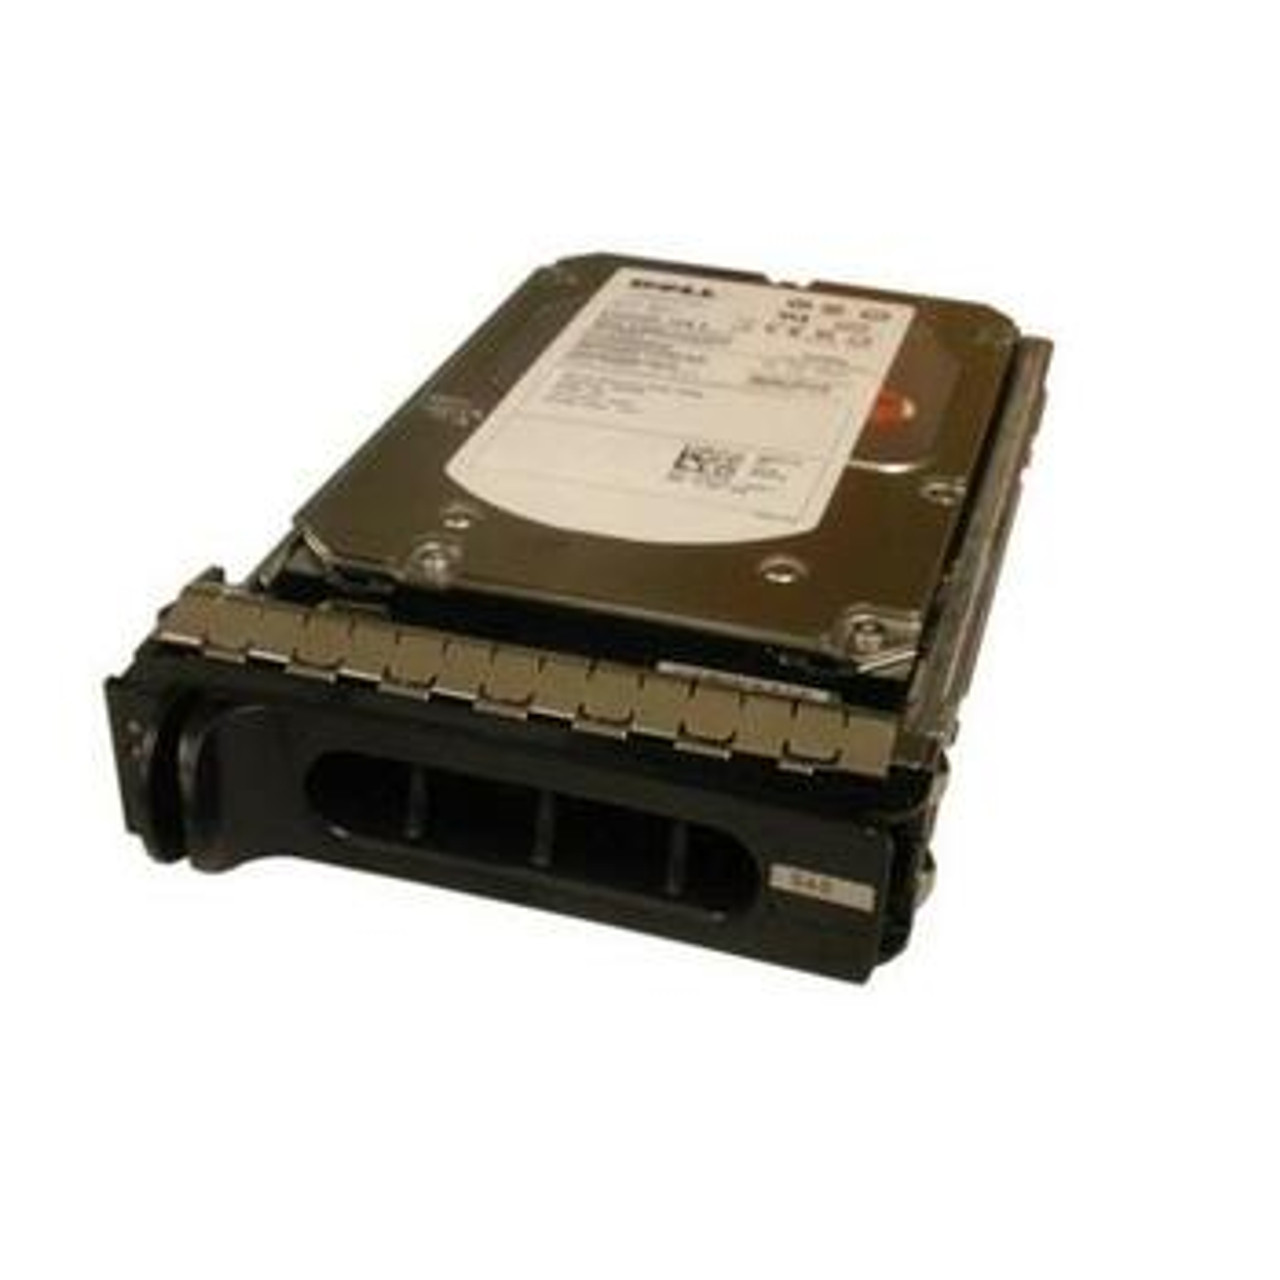 0WR767 Dell 73GB 15000RPM SAS 3.0 Gbps 3.5 16MB Cache Hard Drive